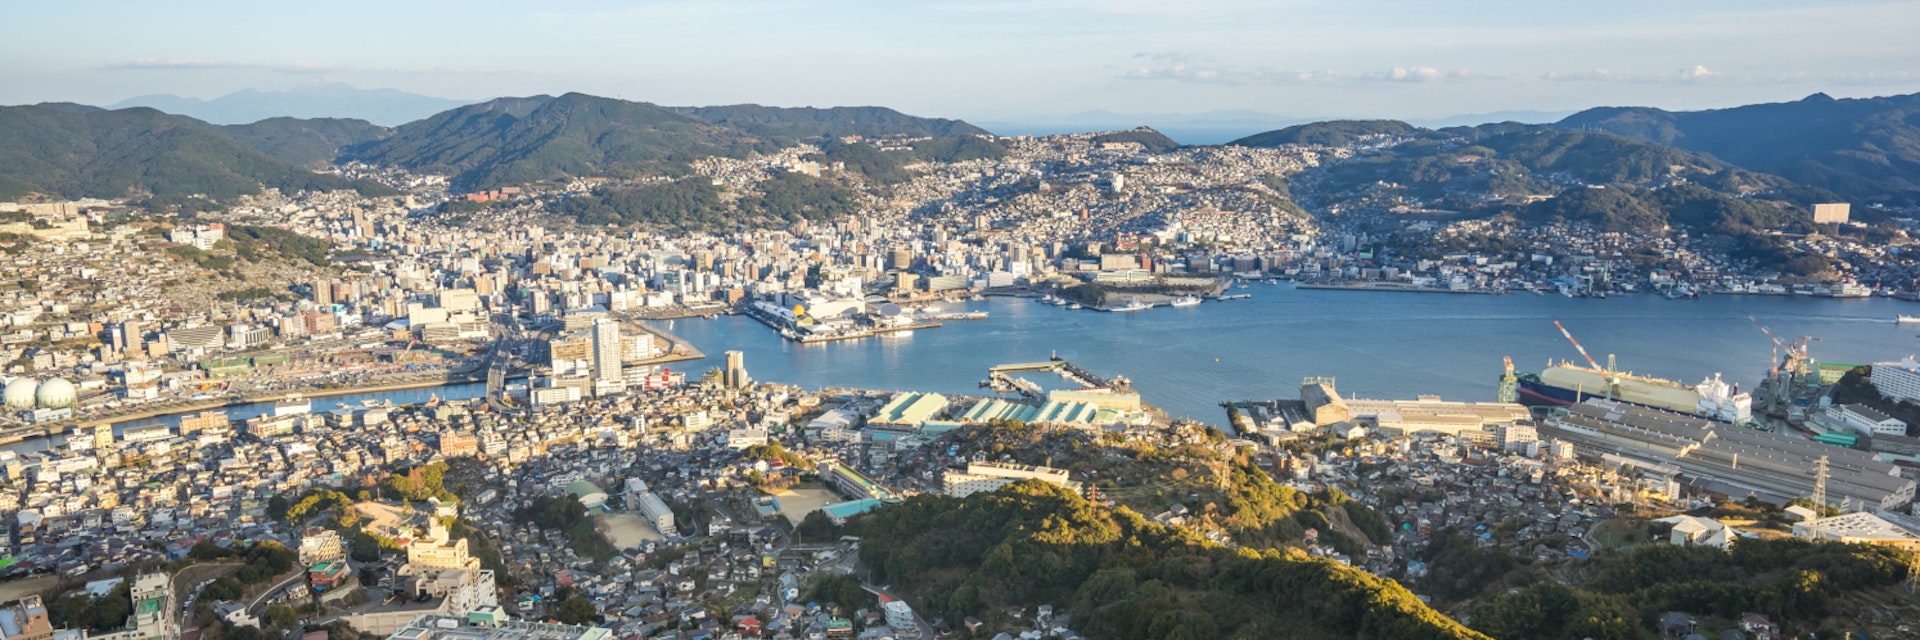 Nagasaki city skyline view from Inasa Mount in Nagasaki, Japan.; Shutterstock ID 1040318305; Your name (First / Last): Laura Crawford; GL account no.: 65050; Netsuite department name: Online Editorial; Full Product or Project name including edition: HCMC & Nagasaki page images BiA